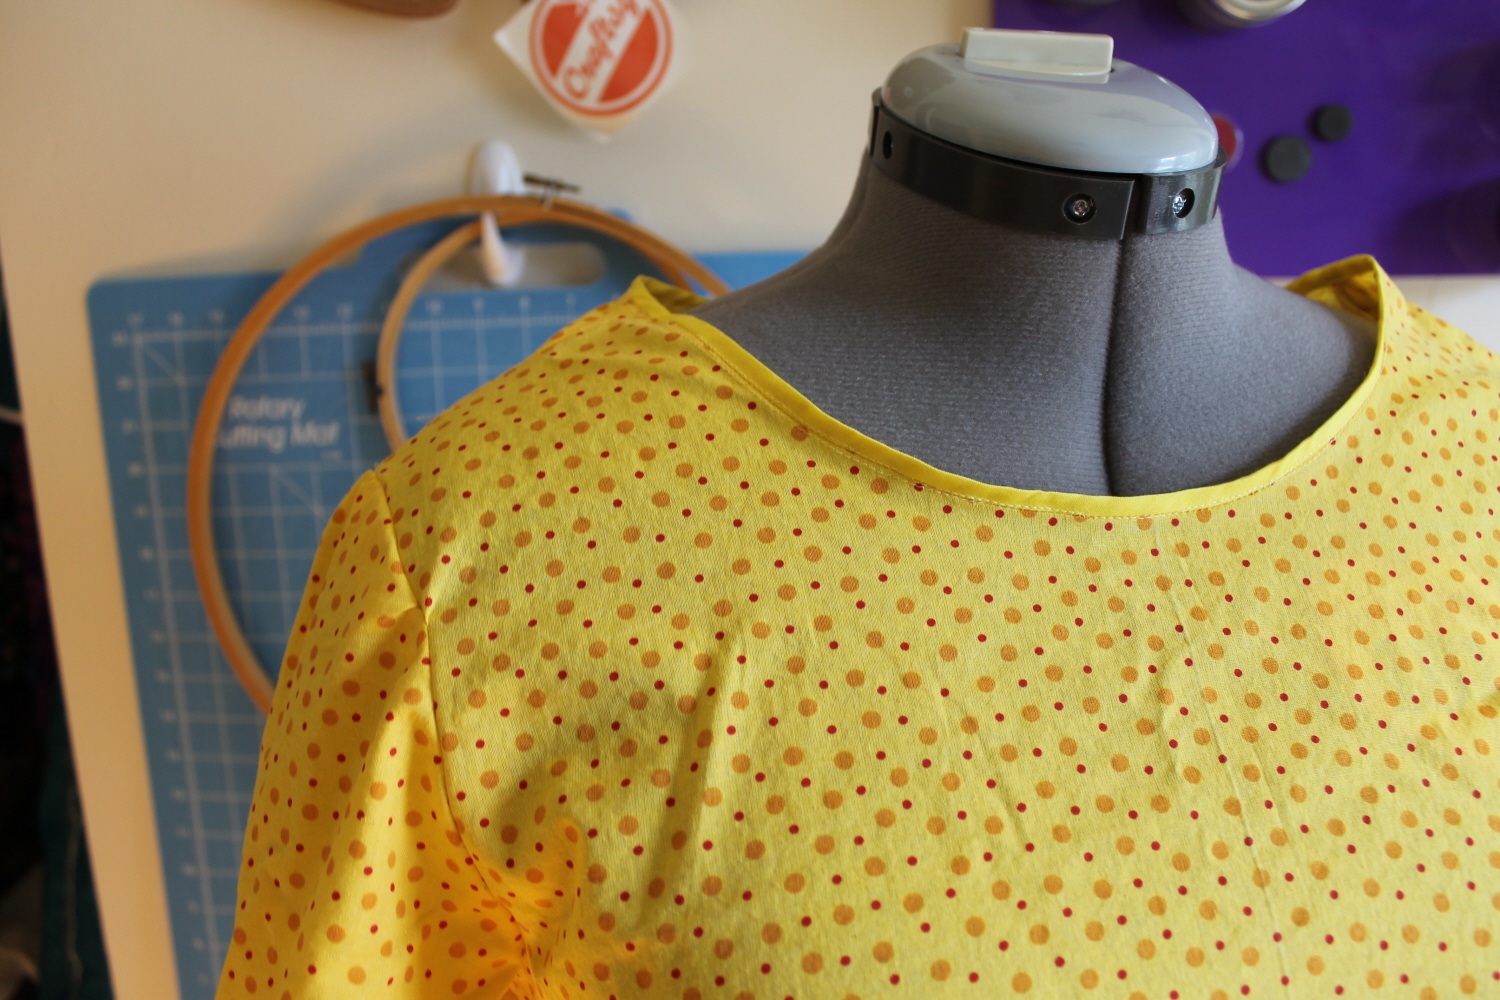 Sewing a dress with shortcuts